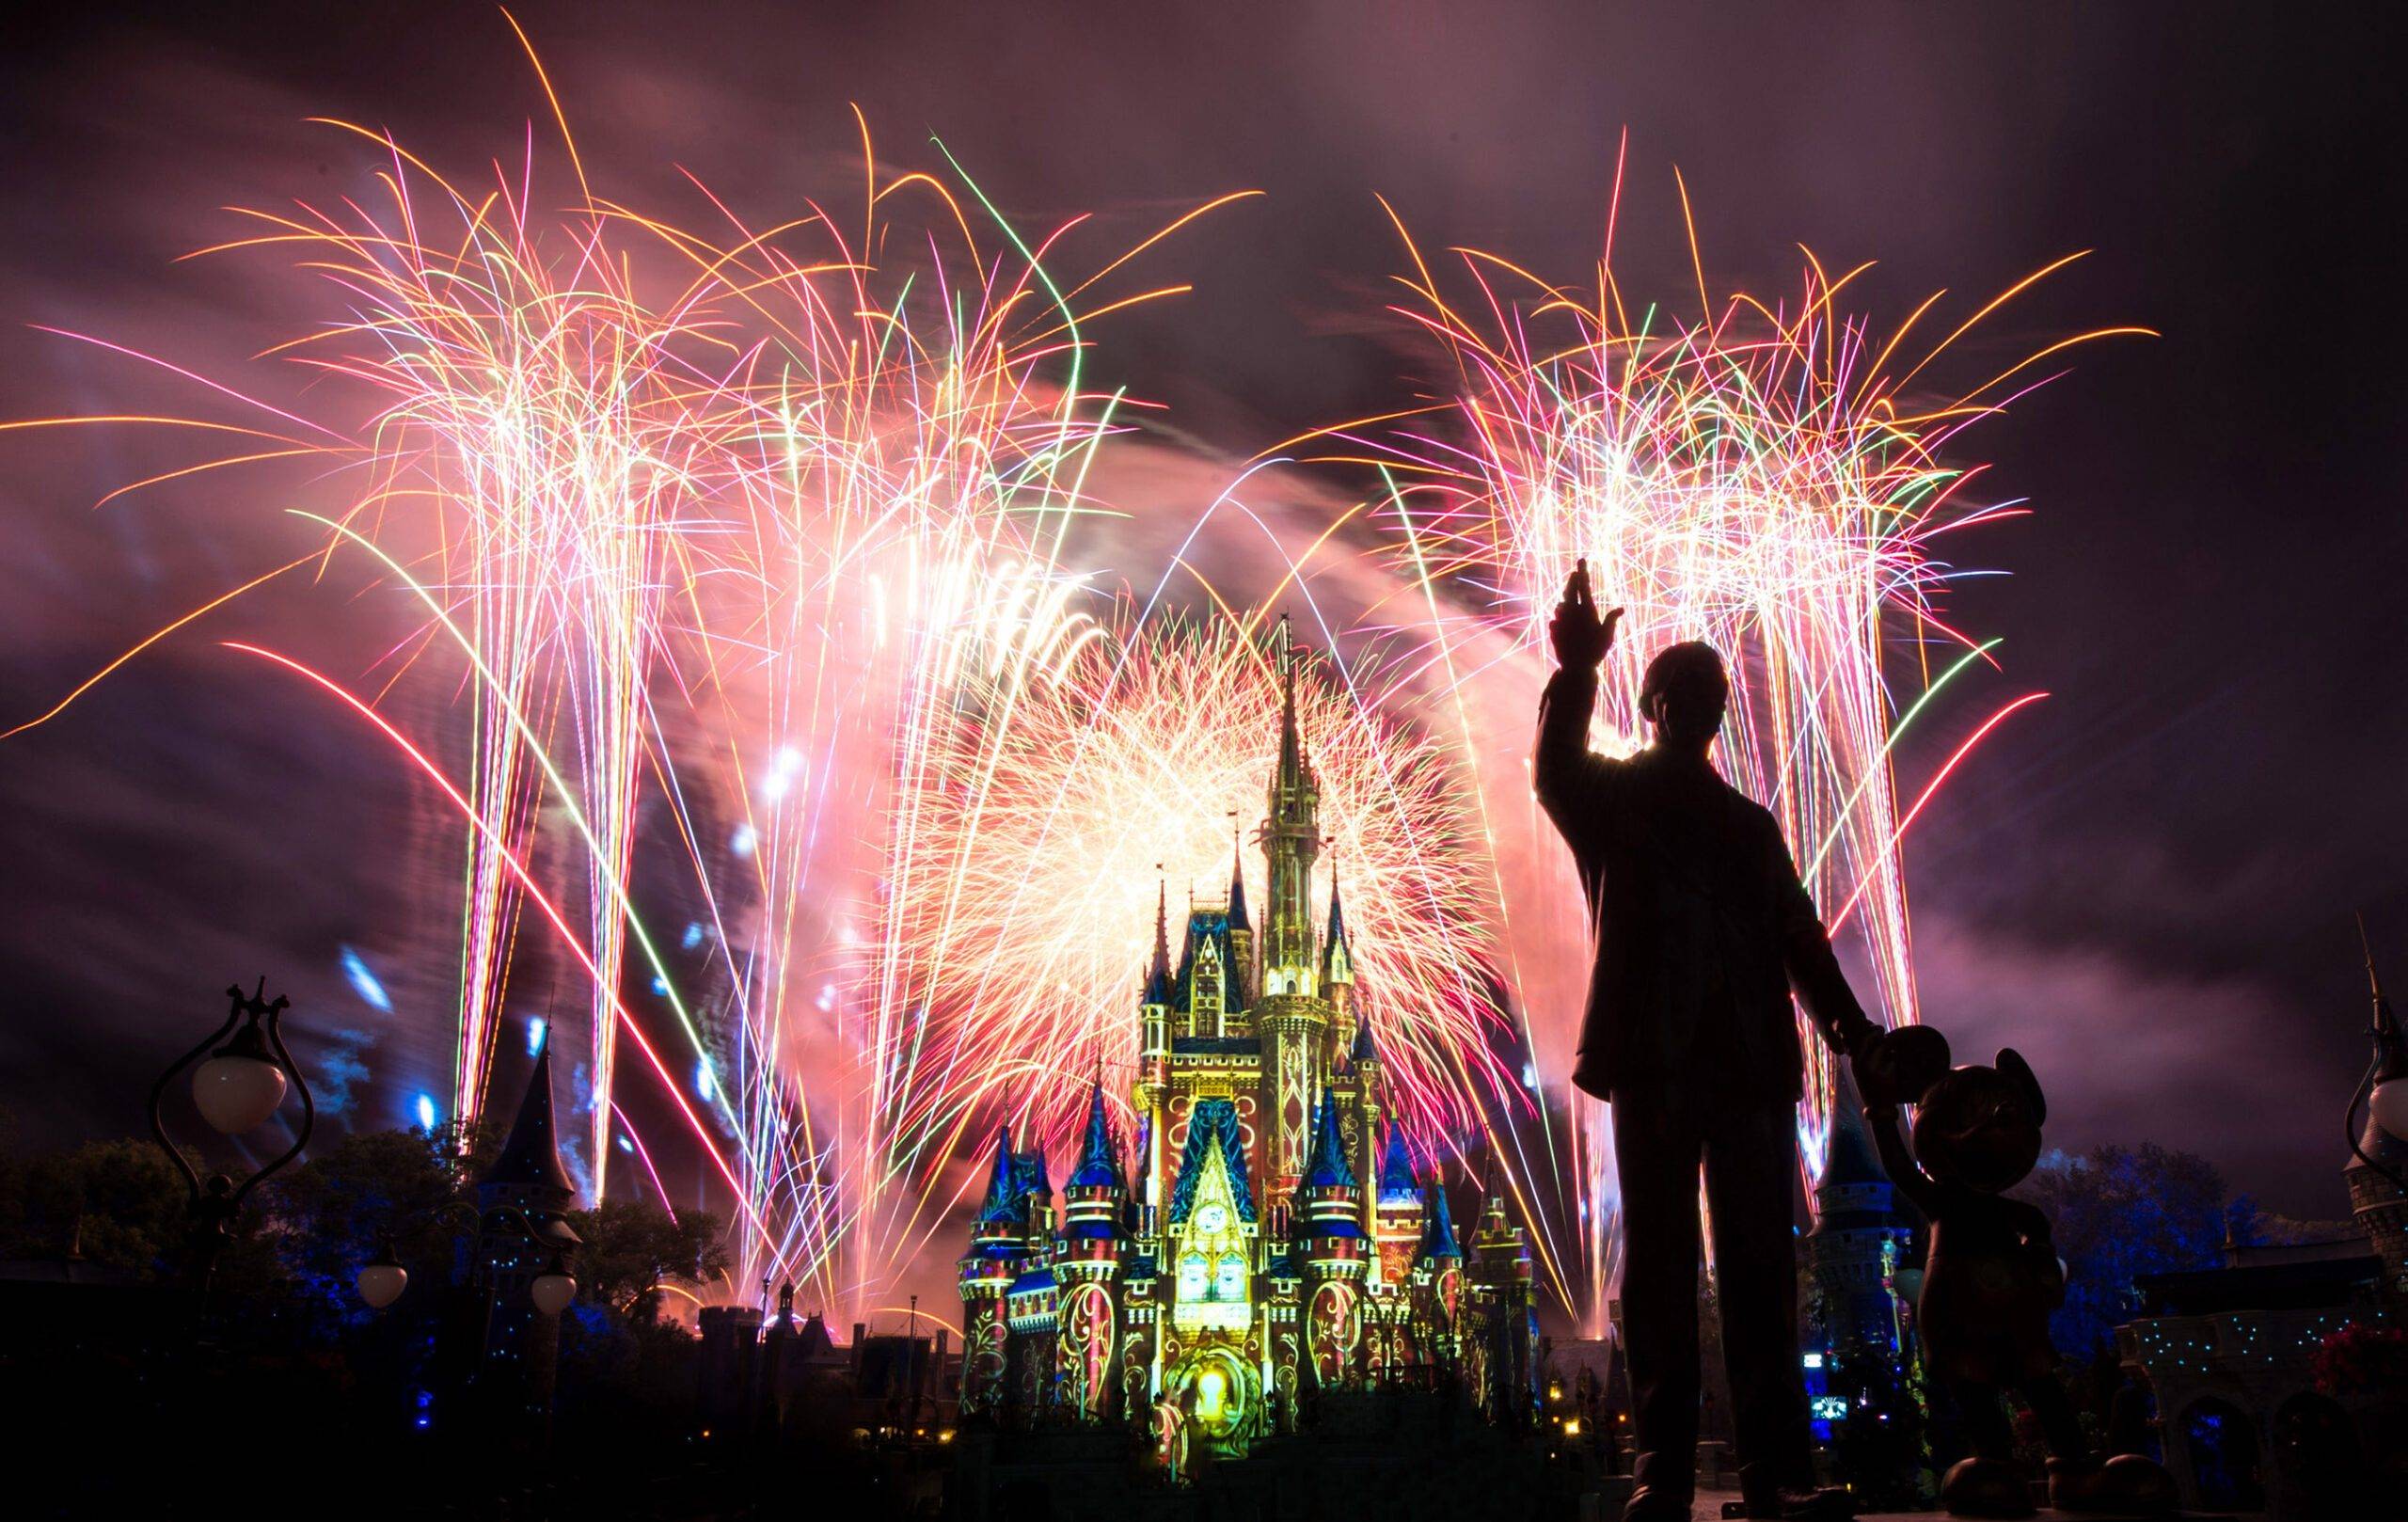 Happily Ever After returns to Magic Kingdom from July 1